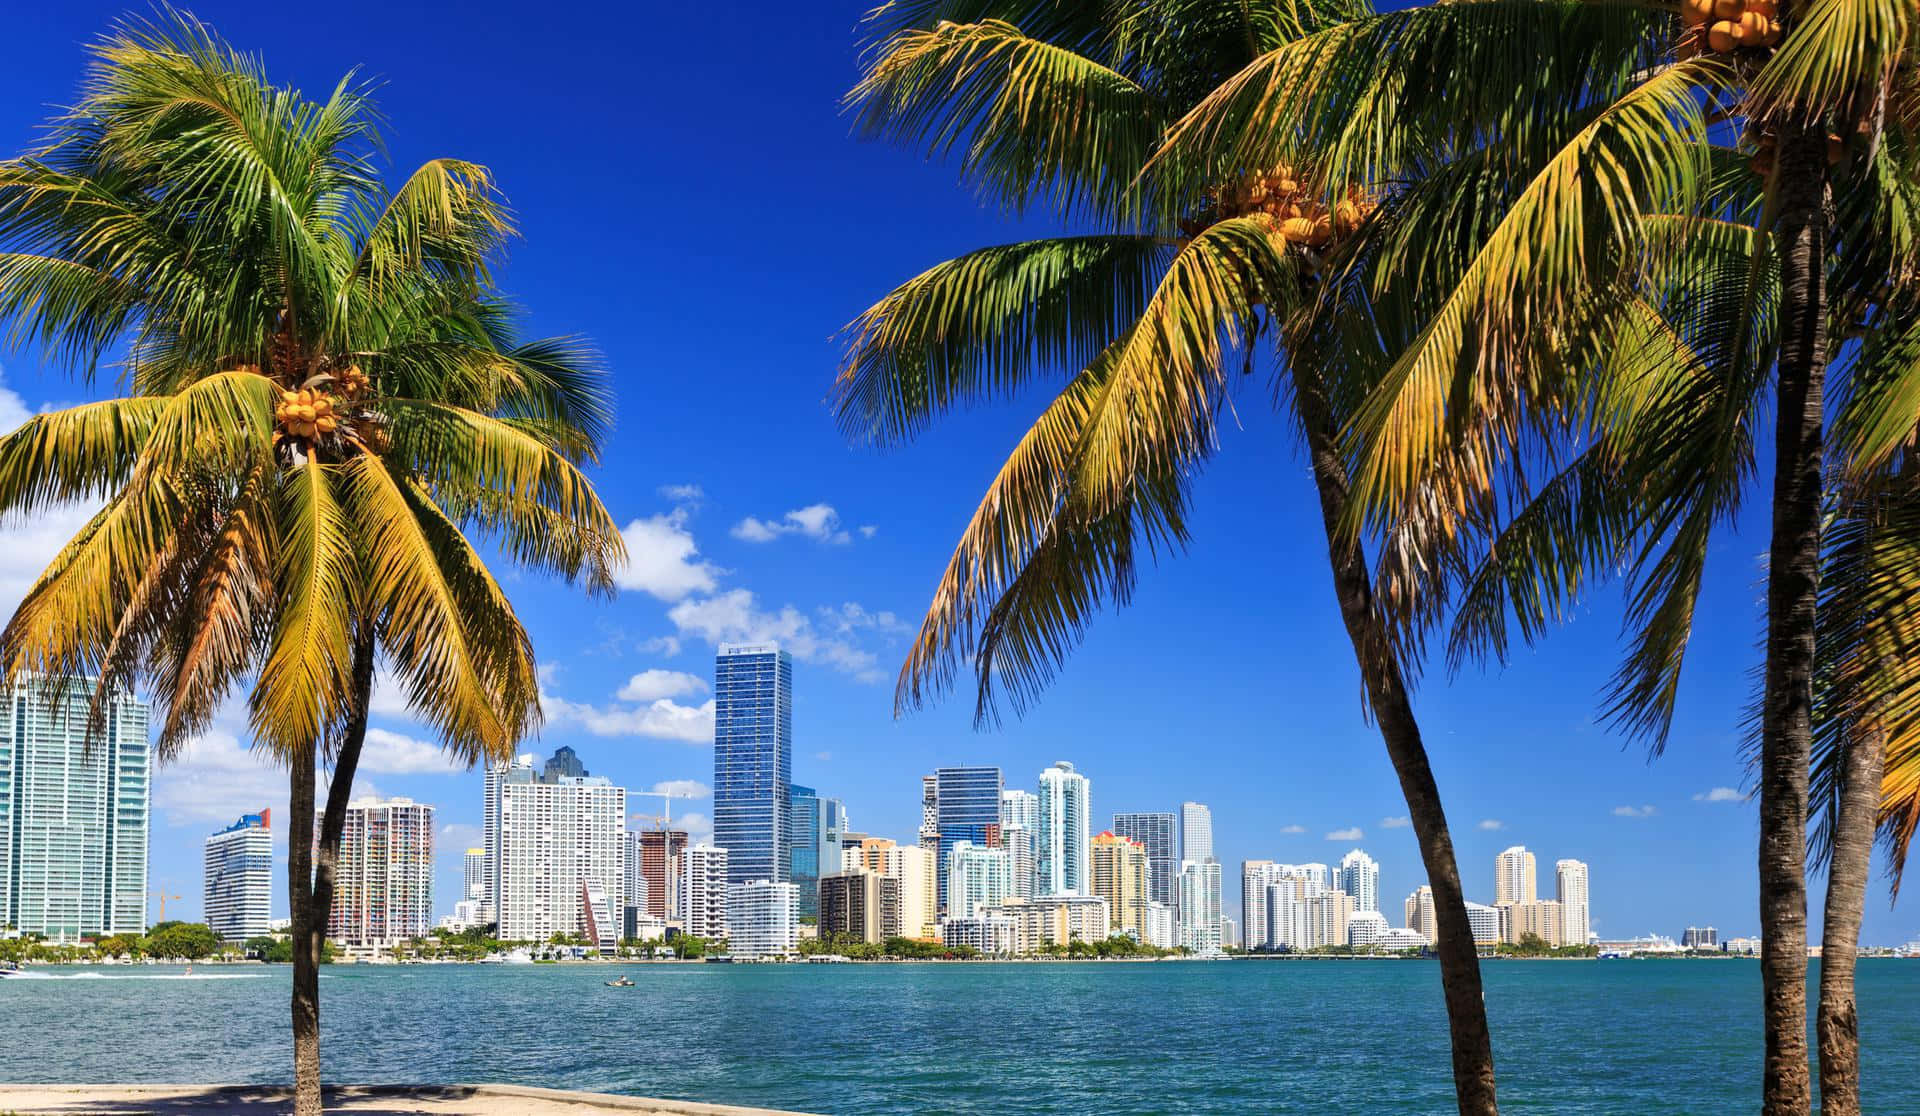 Enjoy A Breathtaking View of Miami in this Amazing Wallpaper